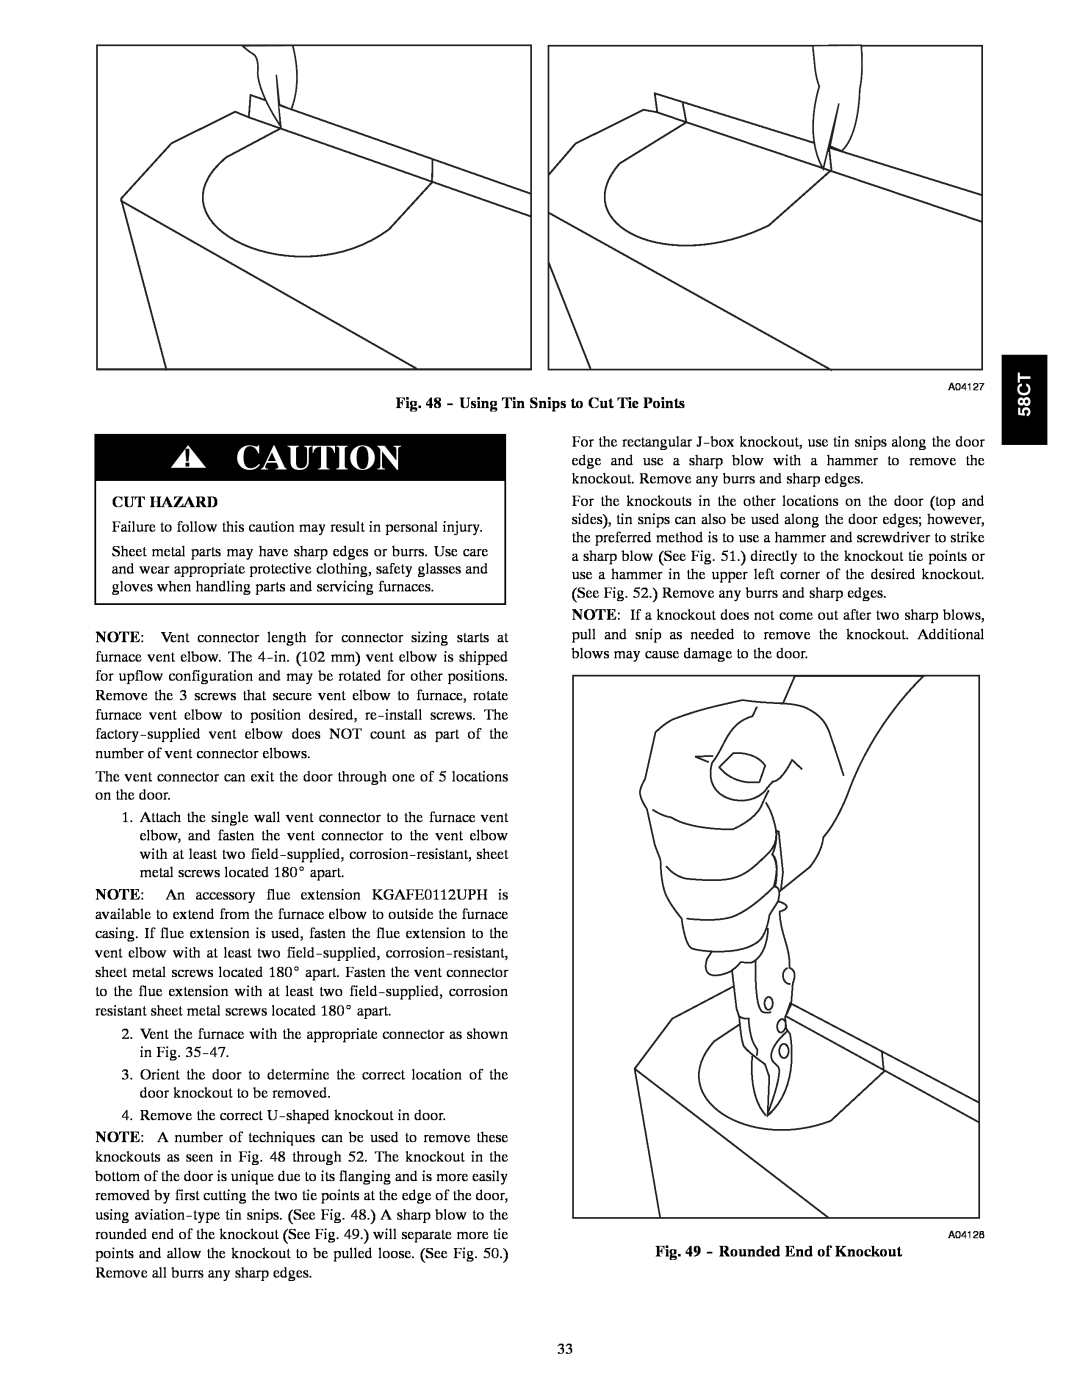 Carrier 58CTA/CTX instruction manual Using Tin Snips to Cut Tie Points, Rounded End of Knockout, Cut Hazard 